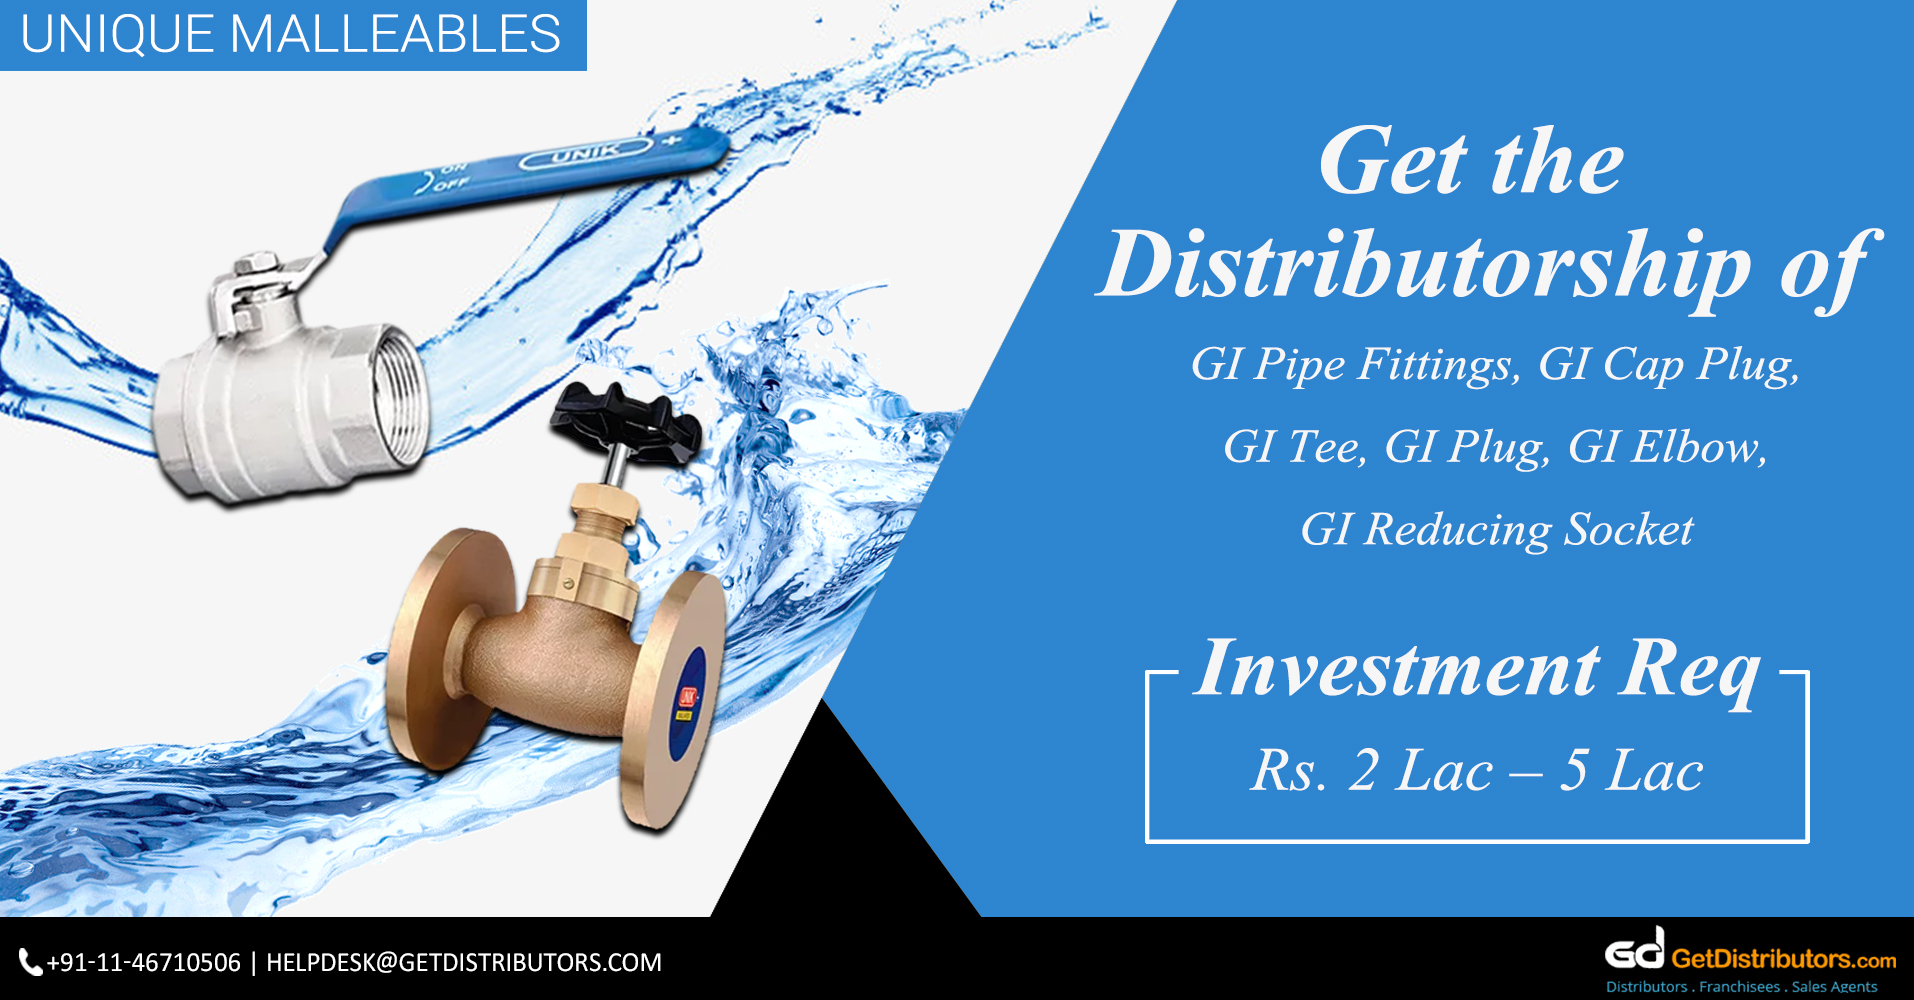 Offering Precisely Designed GI Pipe Fittings At An Affordable Price